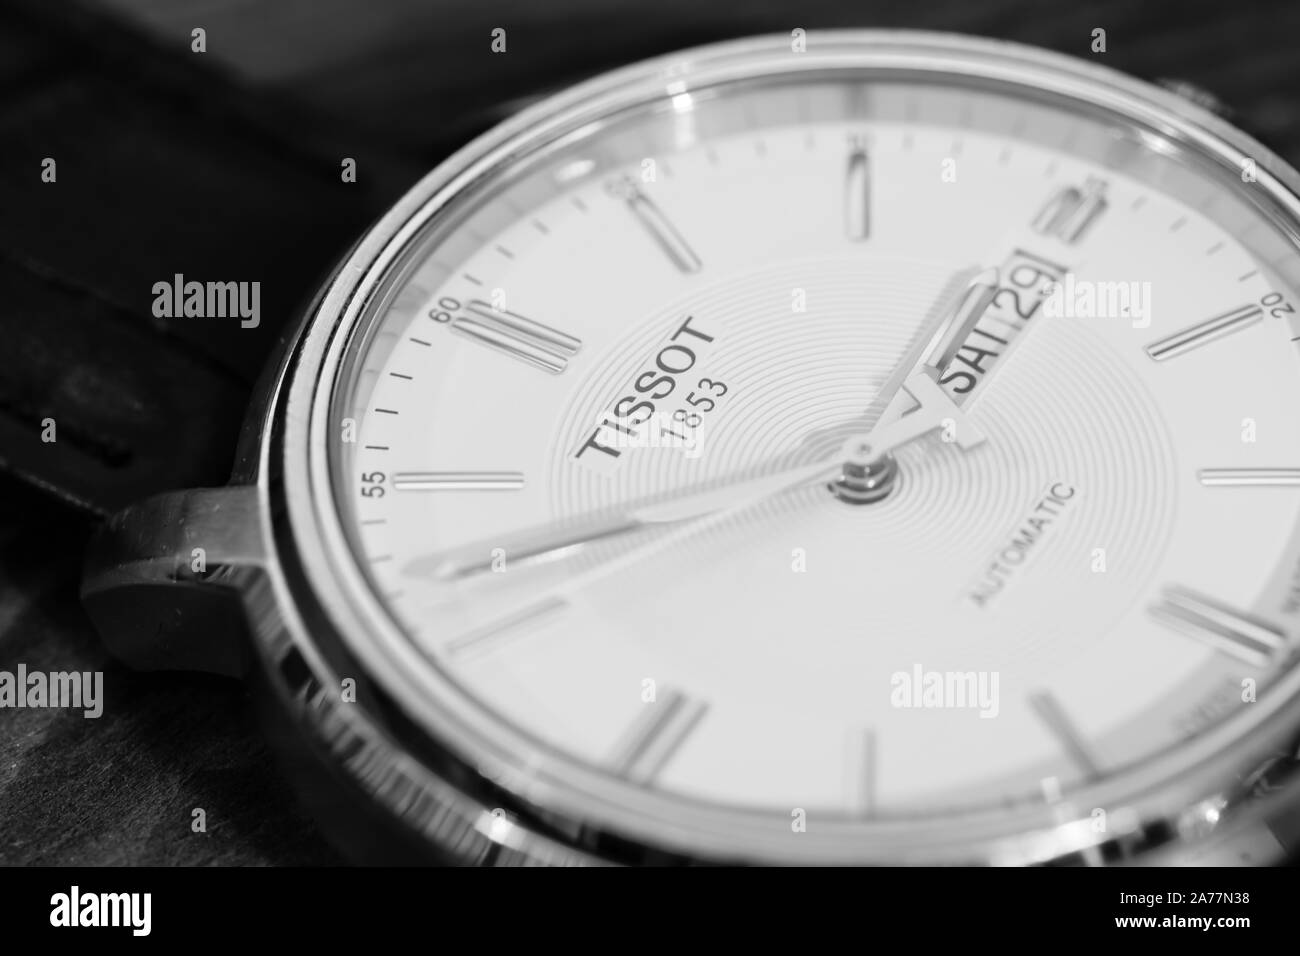 Singapore-11 MAR 2018:The Tissot Automatic watch on black background. Tissot is a luxury Swiss watchmaking company founded in Switzerland. Stock Photo